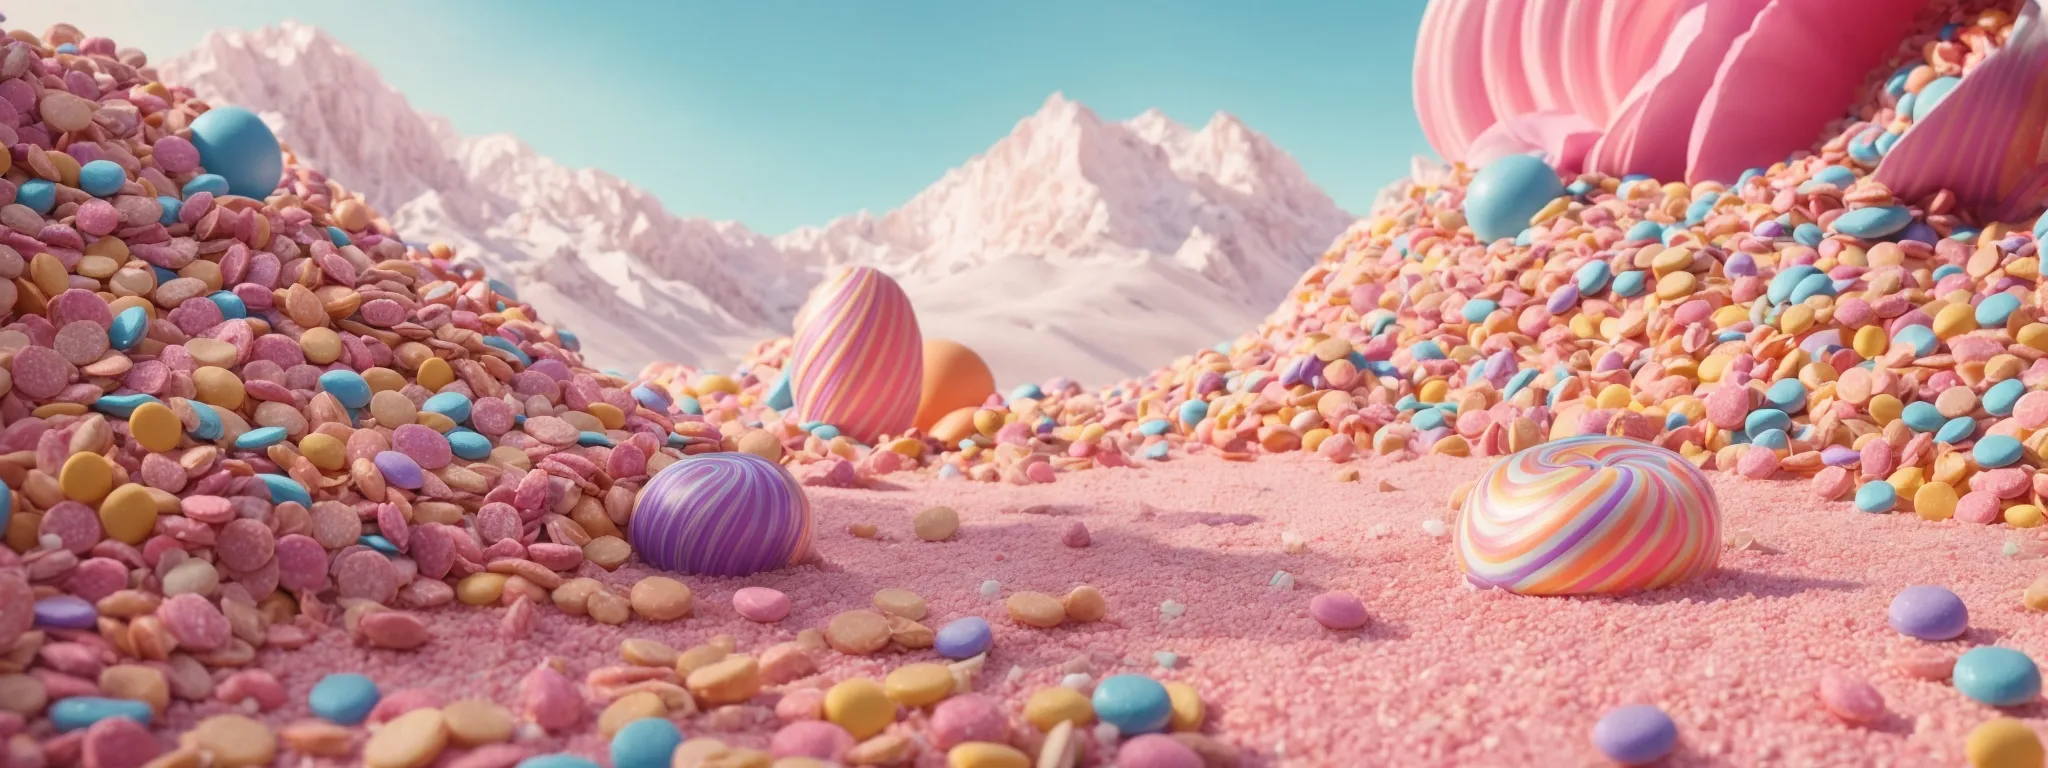 a vibrant pastel world depicting oversized candy and chocolate pieces scattered across a mythical landscape, echoing the colorful essence of candy crush. 